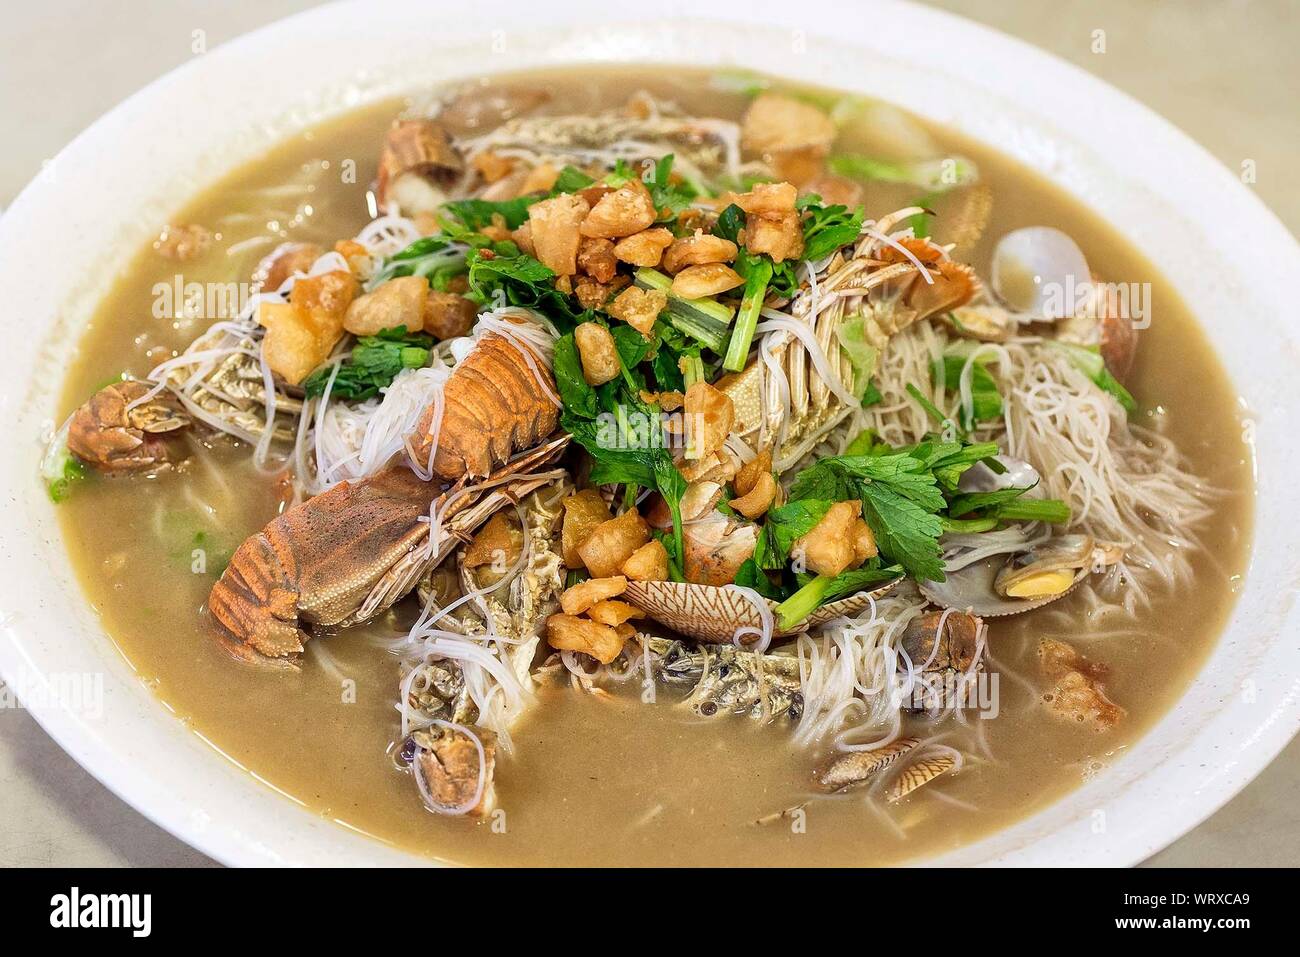 High Angle View Of Seafood With Rice Noodles In Bowl On Table Stock Photo